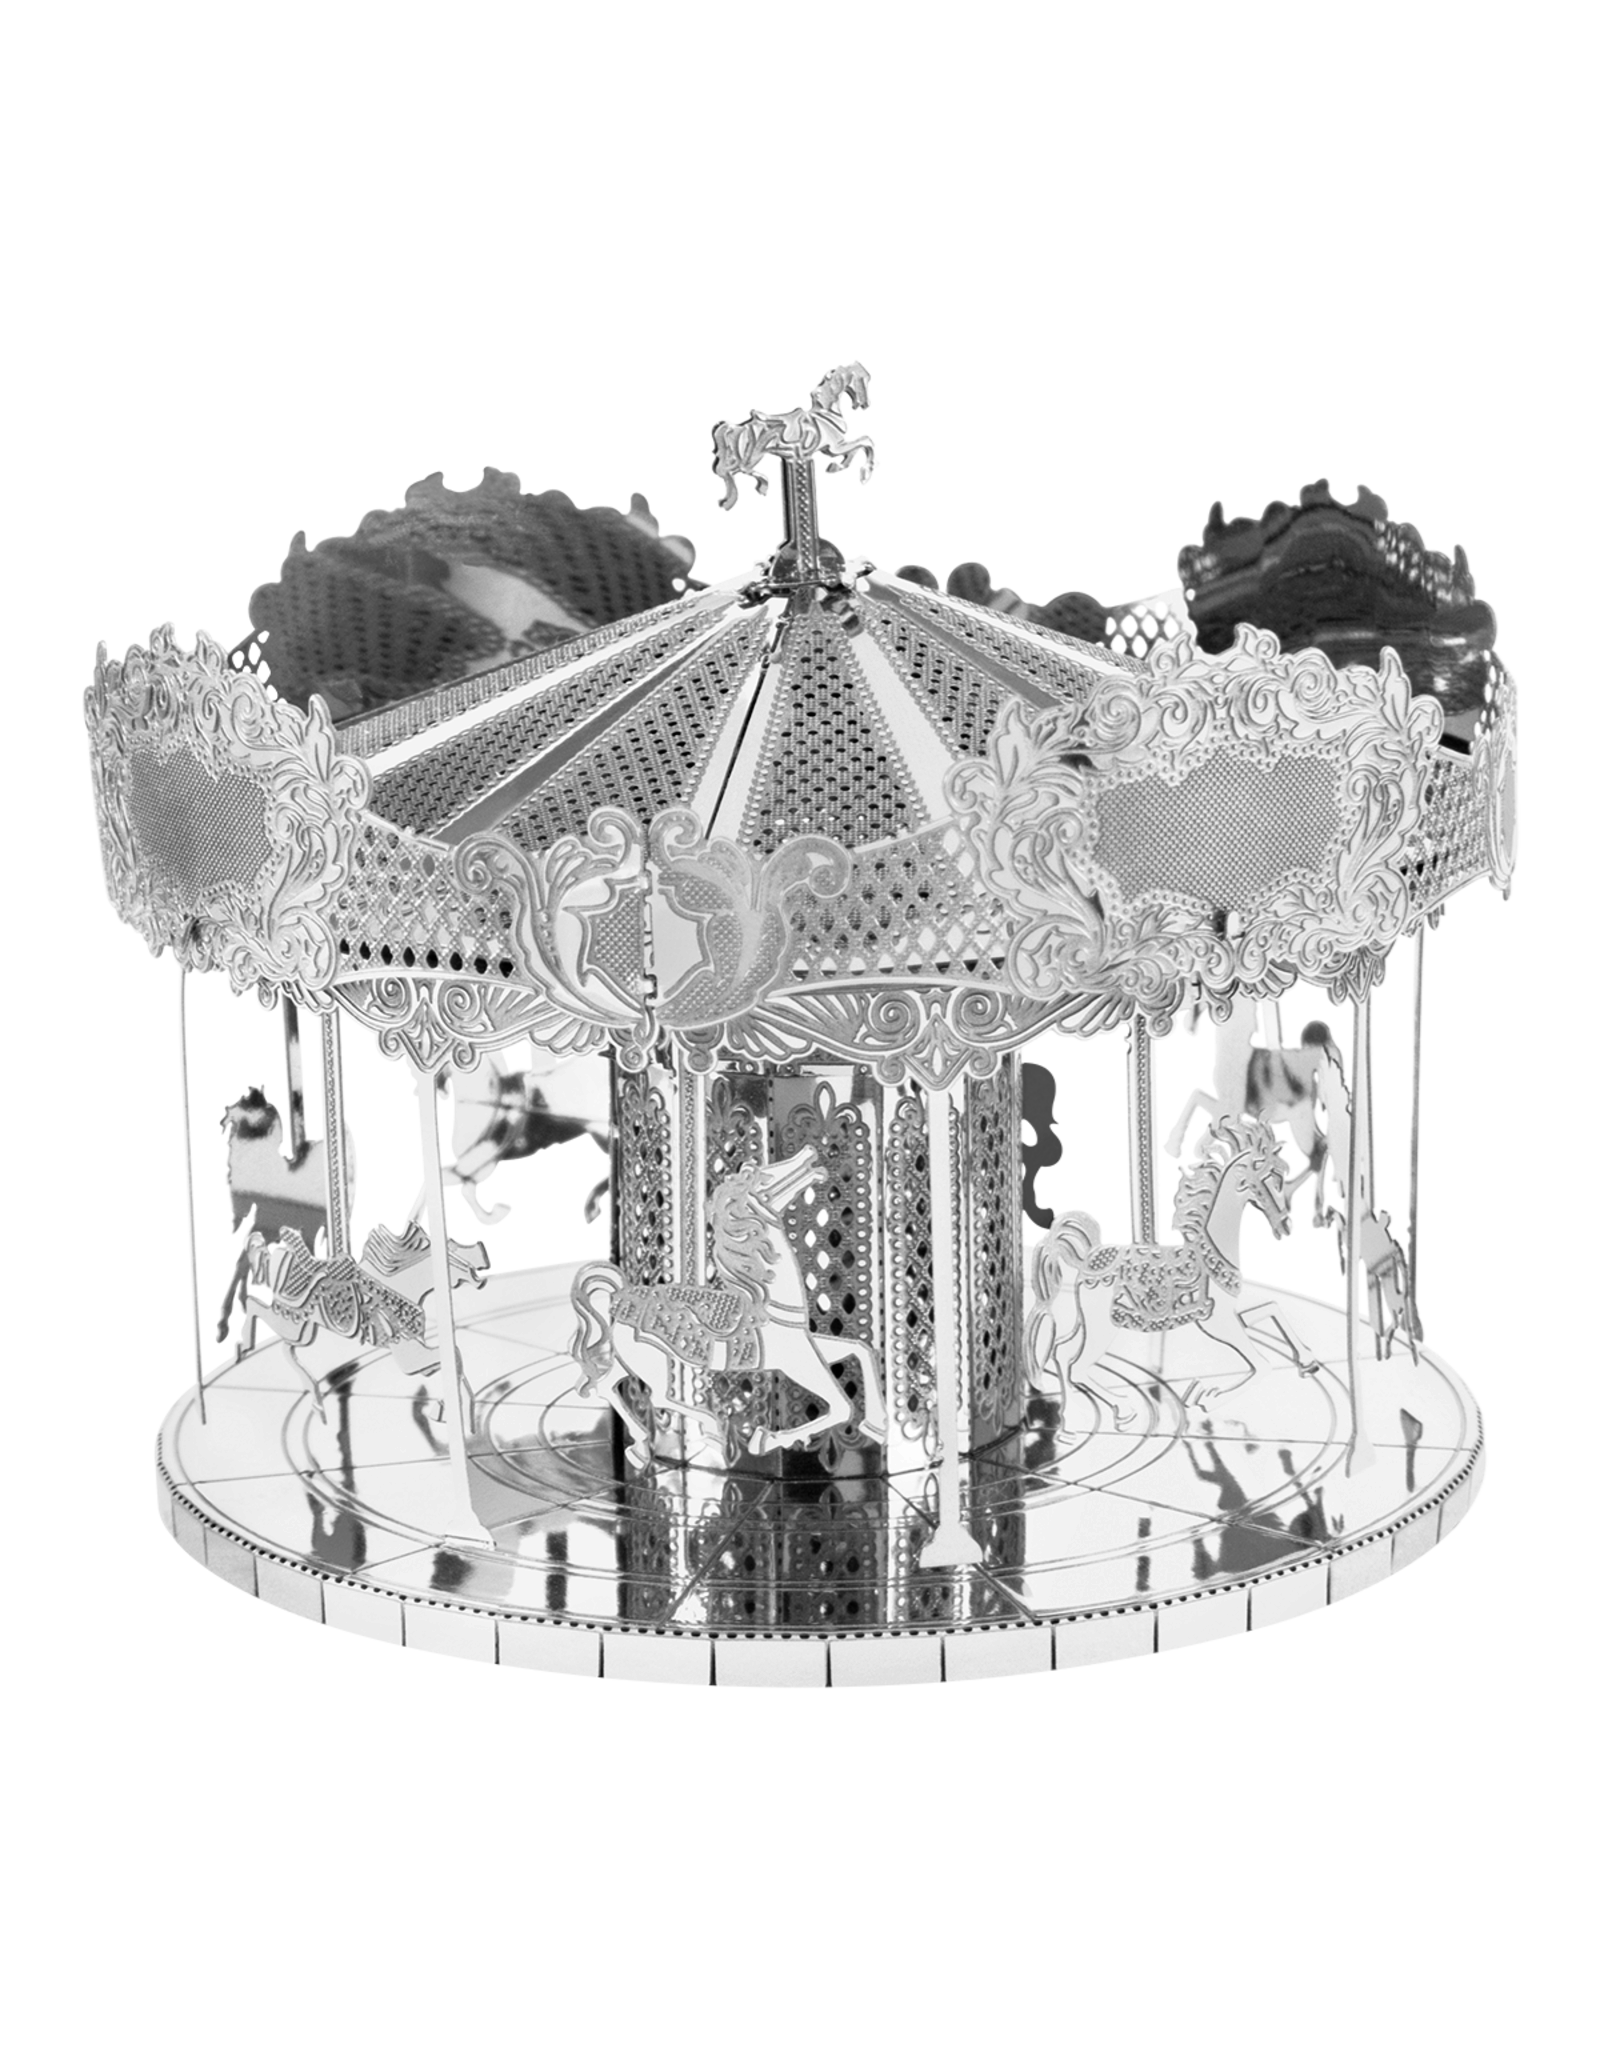 merry-go-round-wit-whimsy-toys